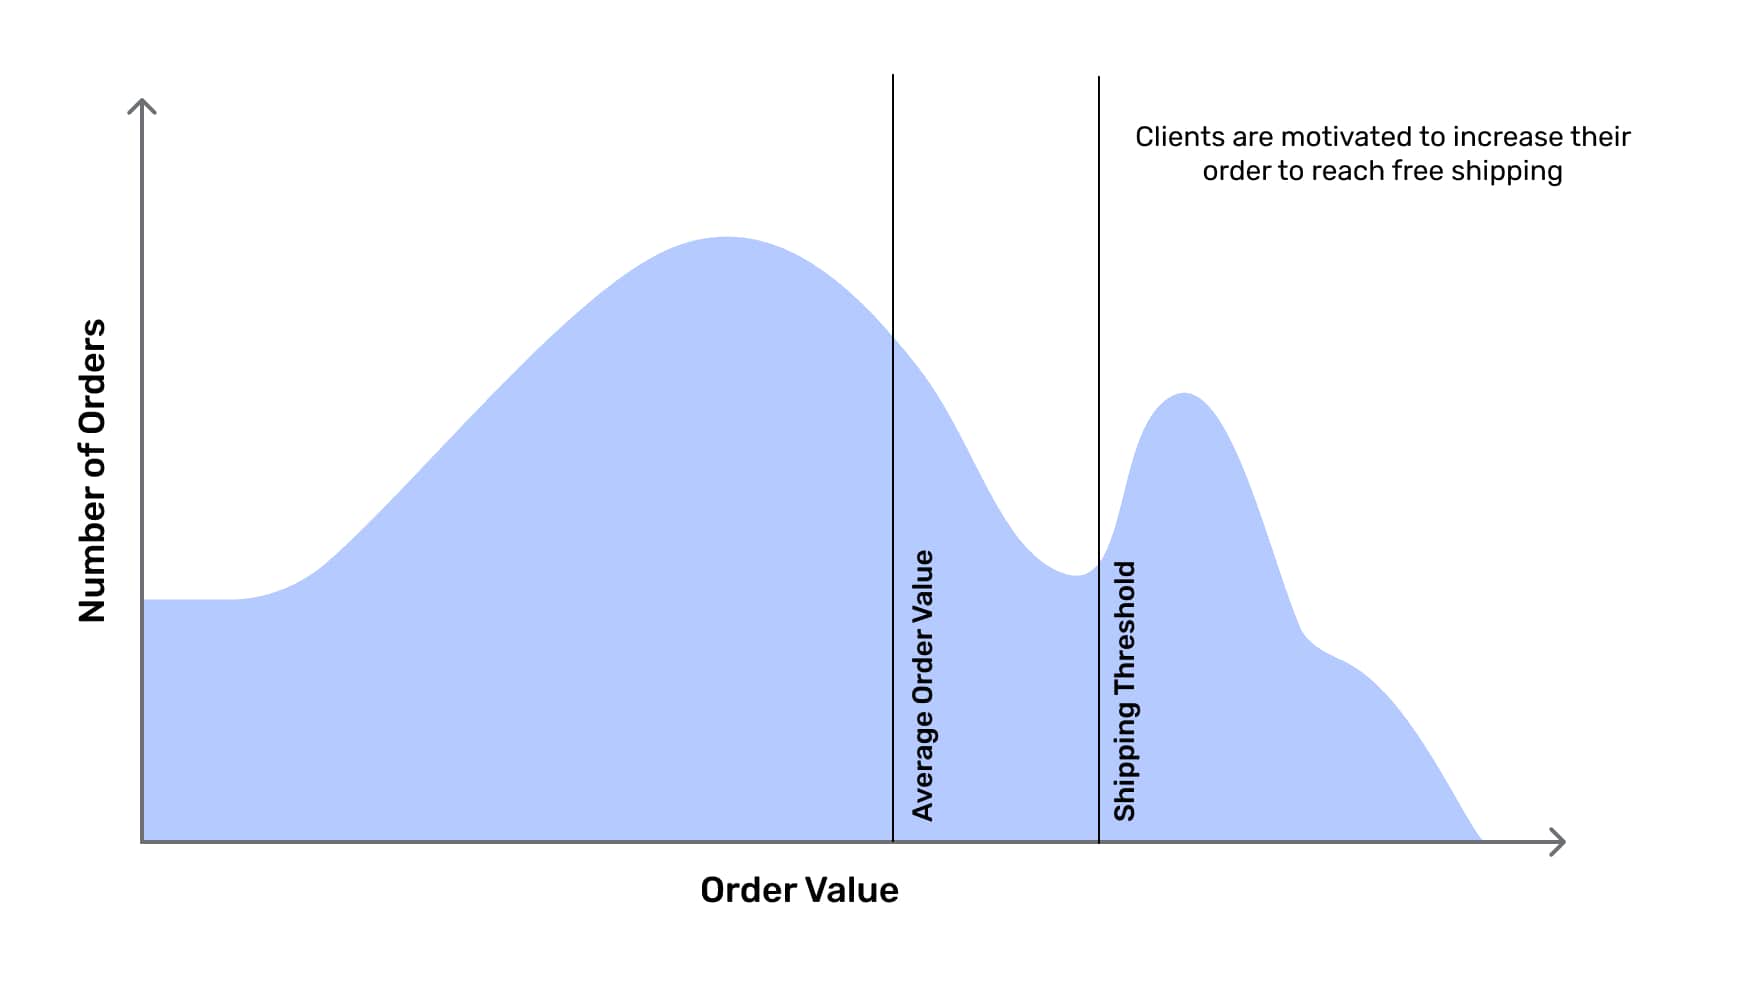 The graph displays the y-axis as "Number of Orders" and the x-axis as "Order Value". It features two bars: one representing the shipping threshold and the other representing Shopify AOV (Average Order Value). The description states, "Clients are motivated to increase their order value in order to qualify for free shipping.”